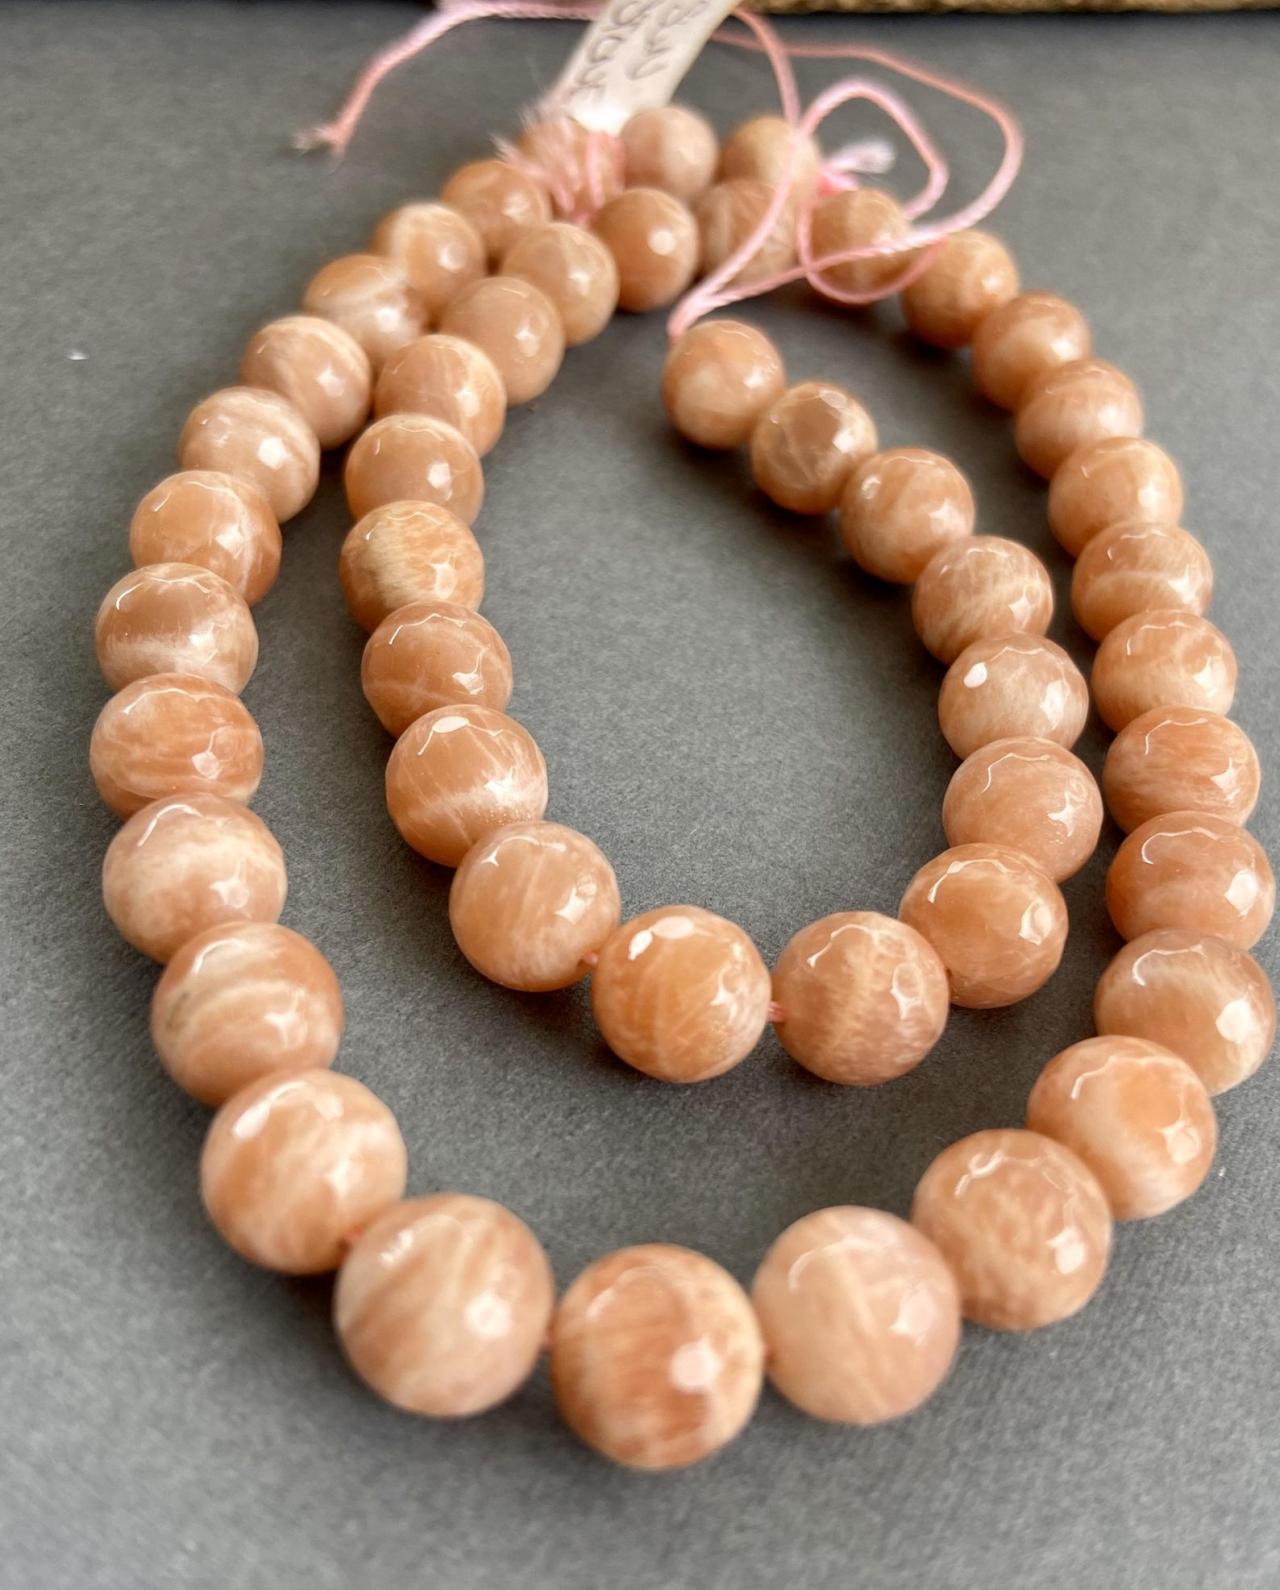 8mm Faceted Natural Round Beads Peach Moonstone Chatoyant Glow 50 Percent Off ! Was 19.99